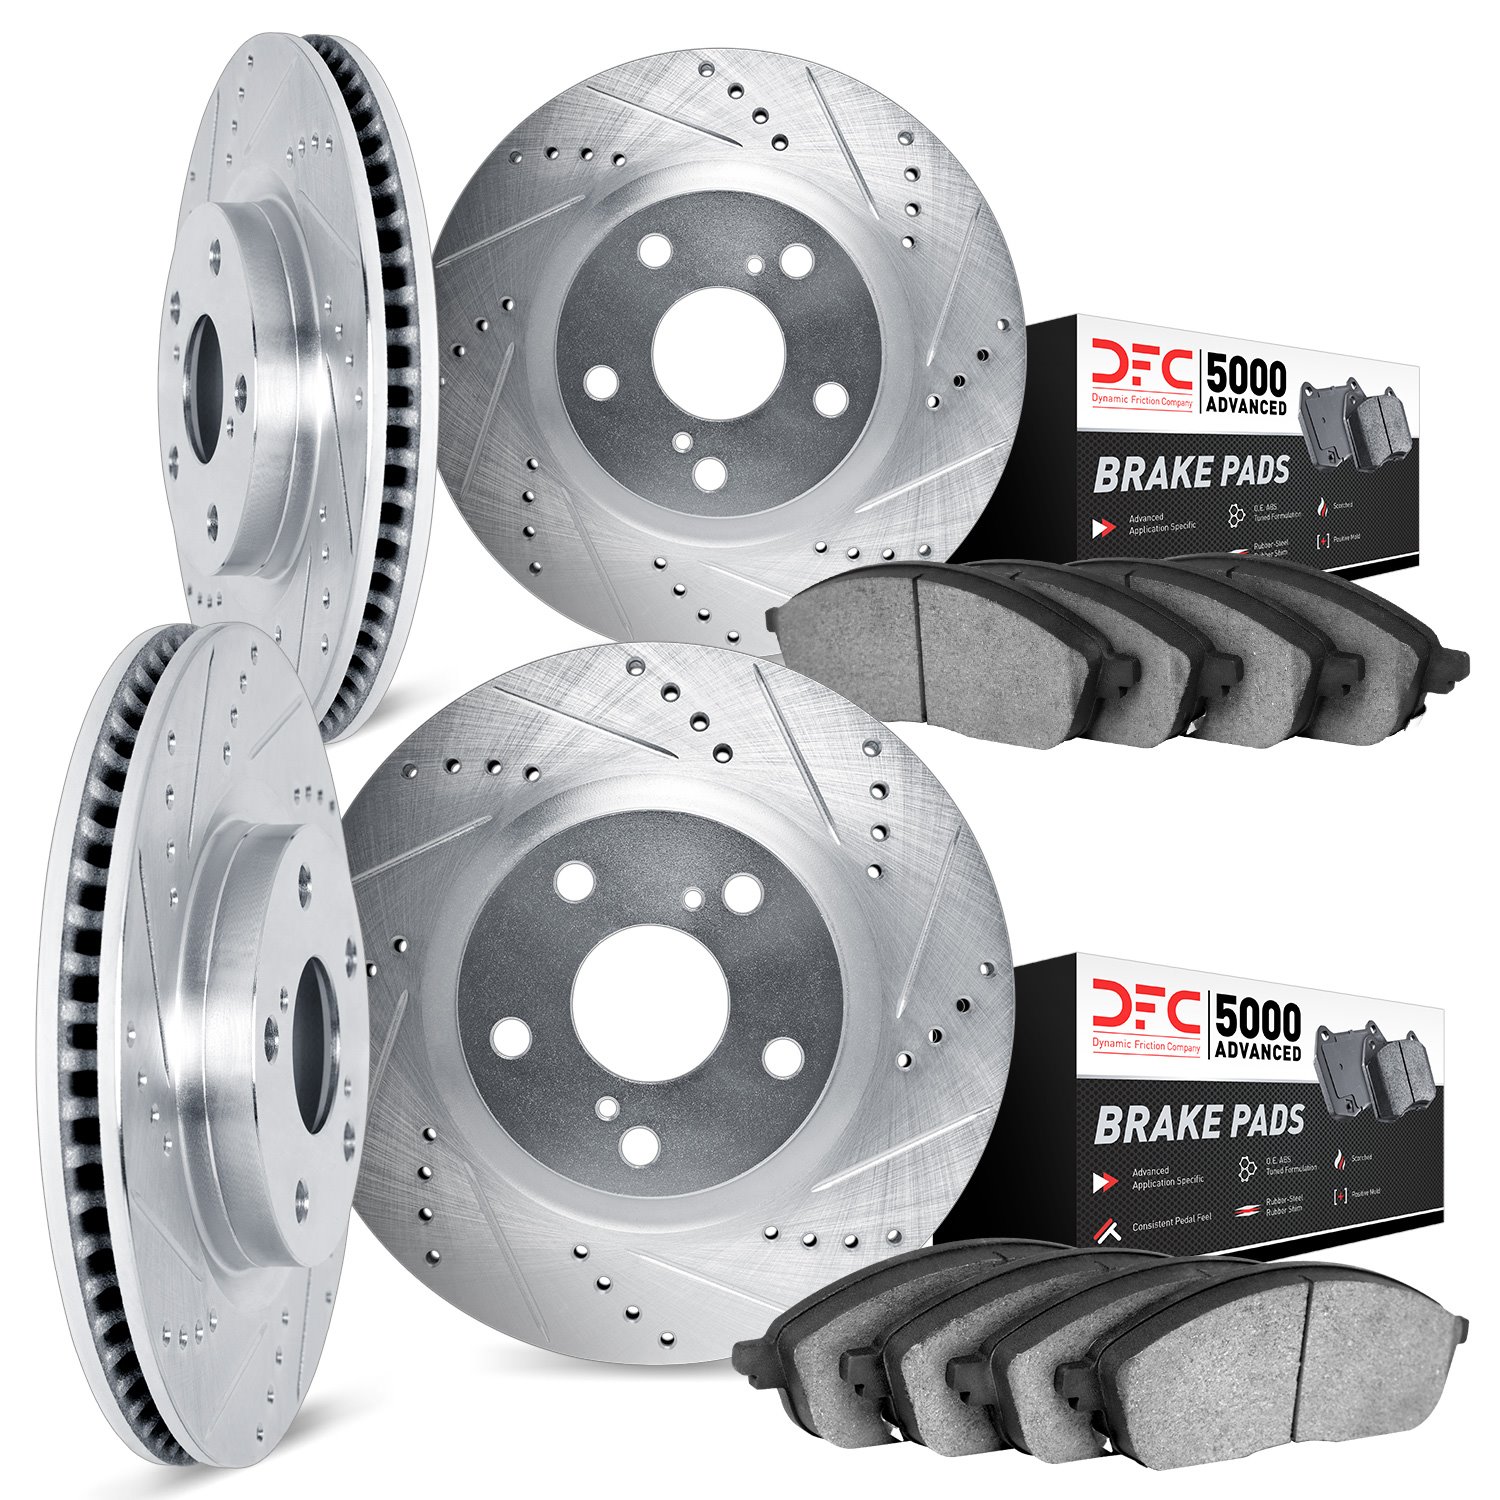 7504-20012 Drilled/Slotted Brake Rotors w/5000 Advanced Brake Pads Kit [Silver], 2003-2005 Jaguar, Position: Front and Rear